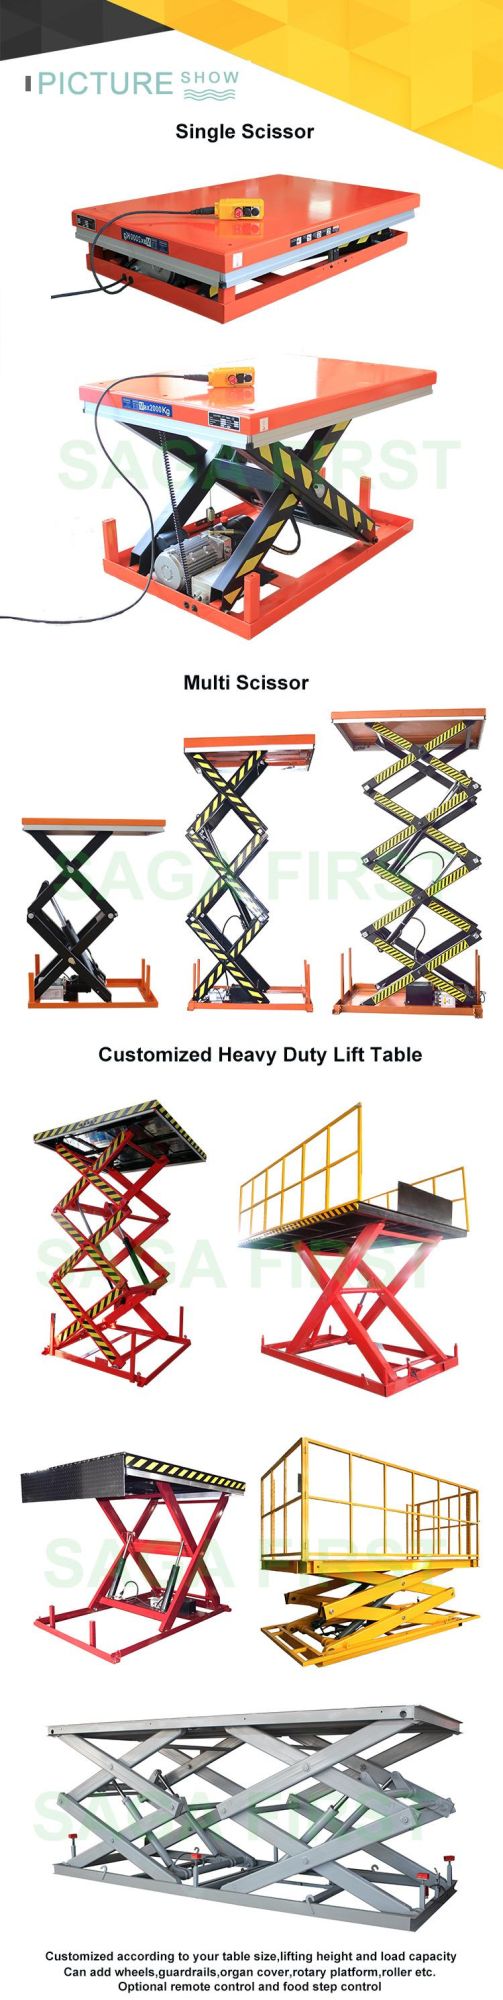 Full Electric Self-Propelled Movable Industrial Mini Manlift Company